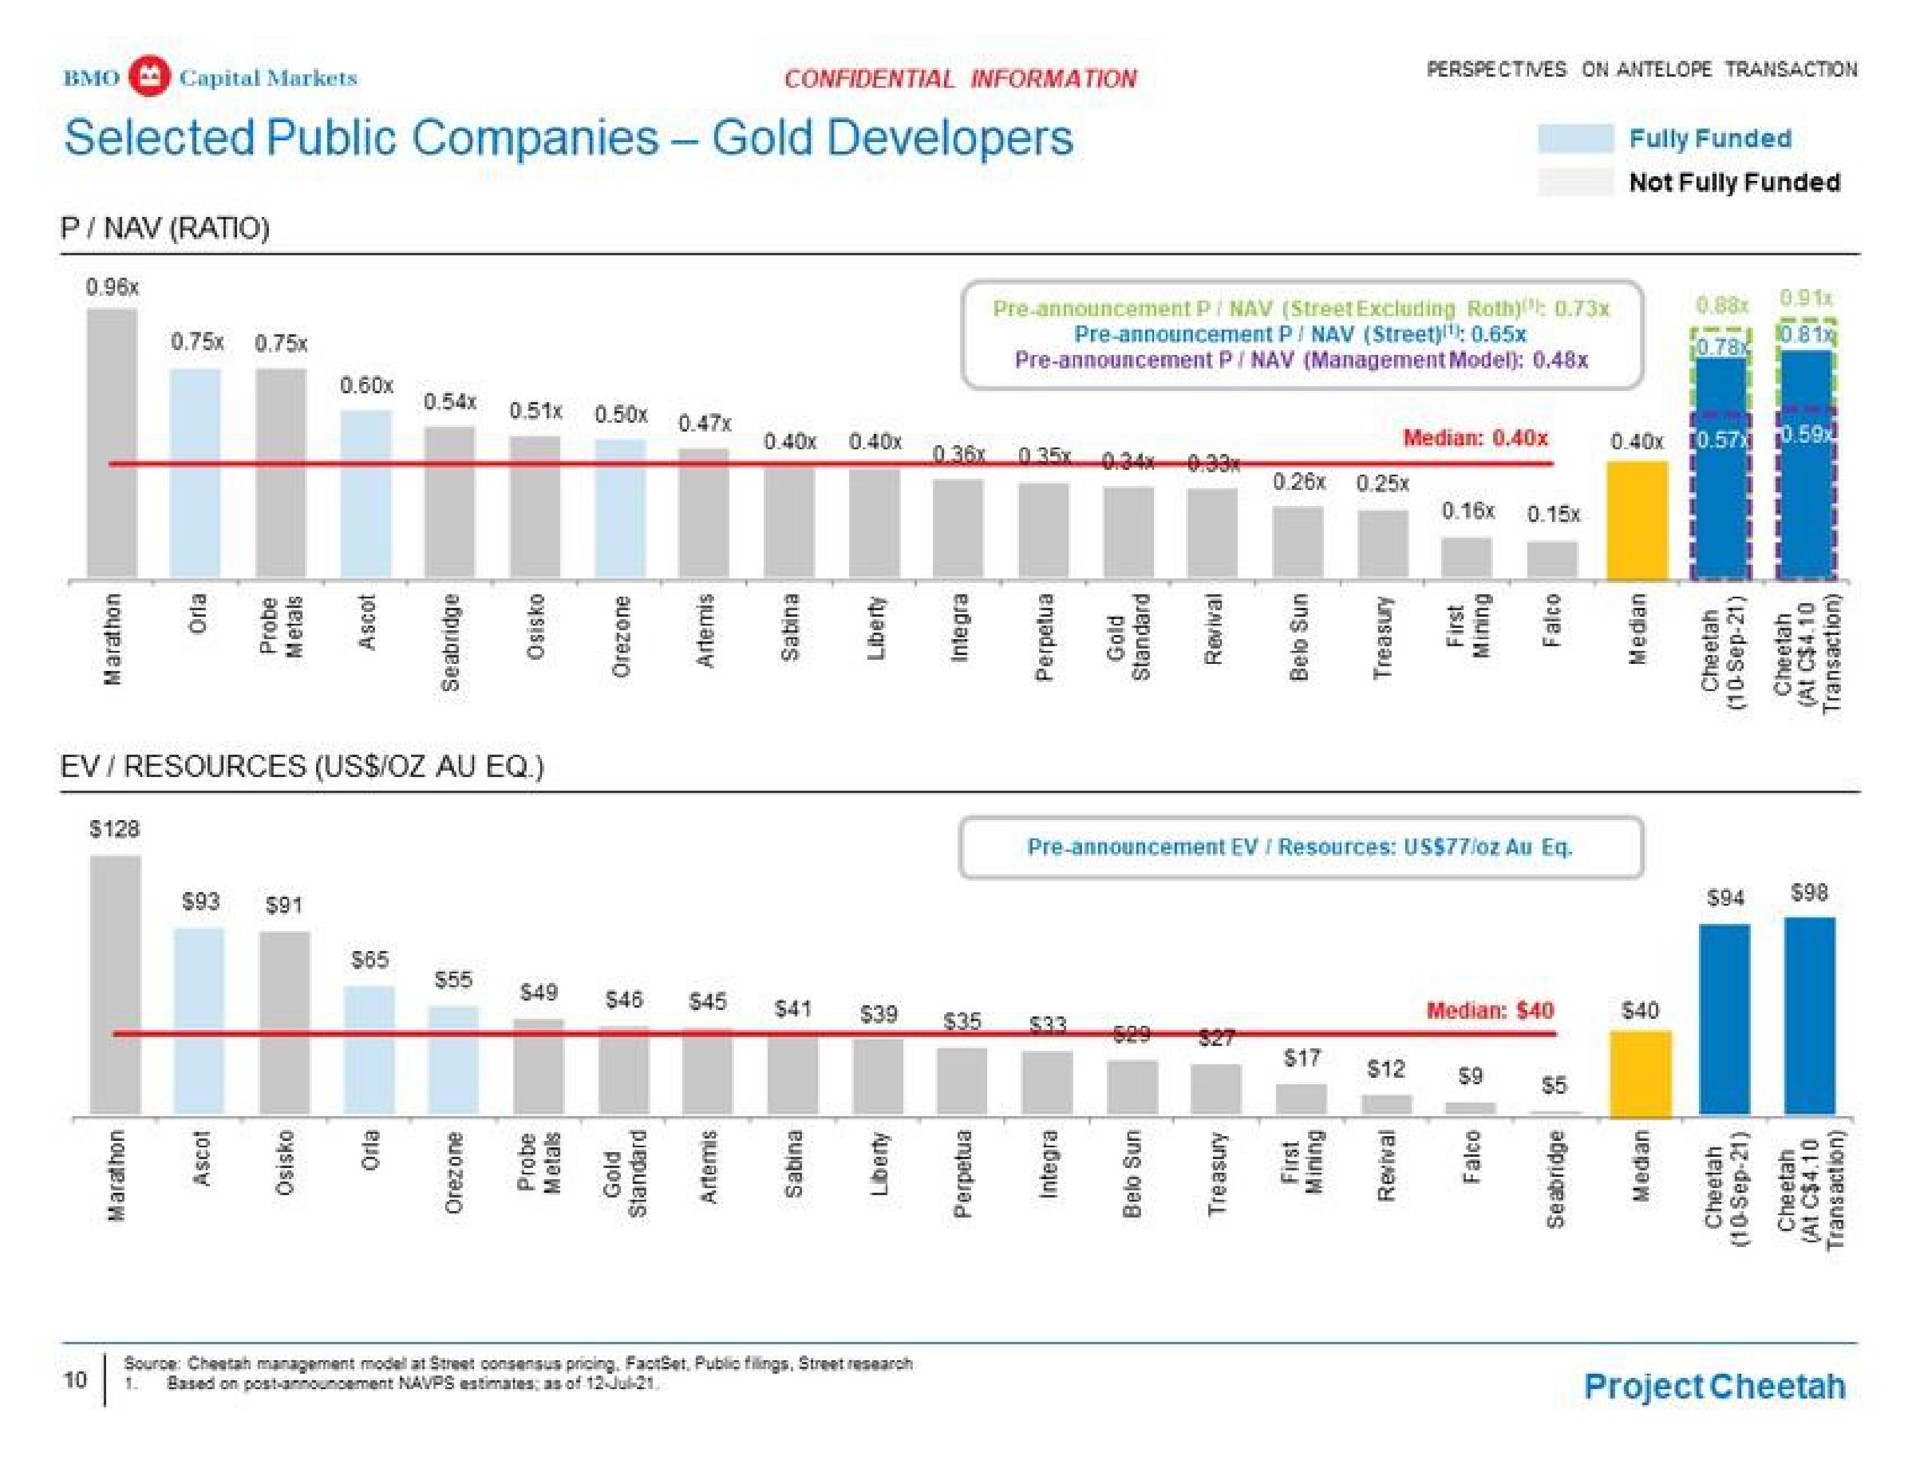 capital markets selected public companies gold developers confidential information fully funded a be gag median a a sag act | BMO Capital Markets